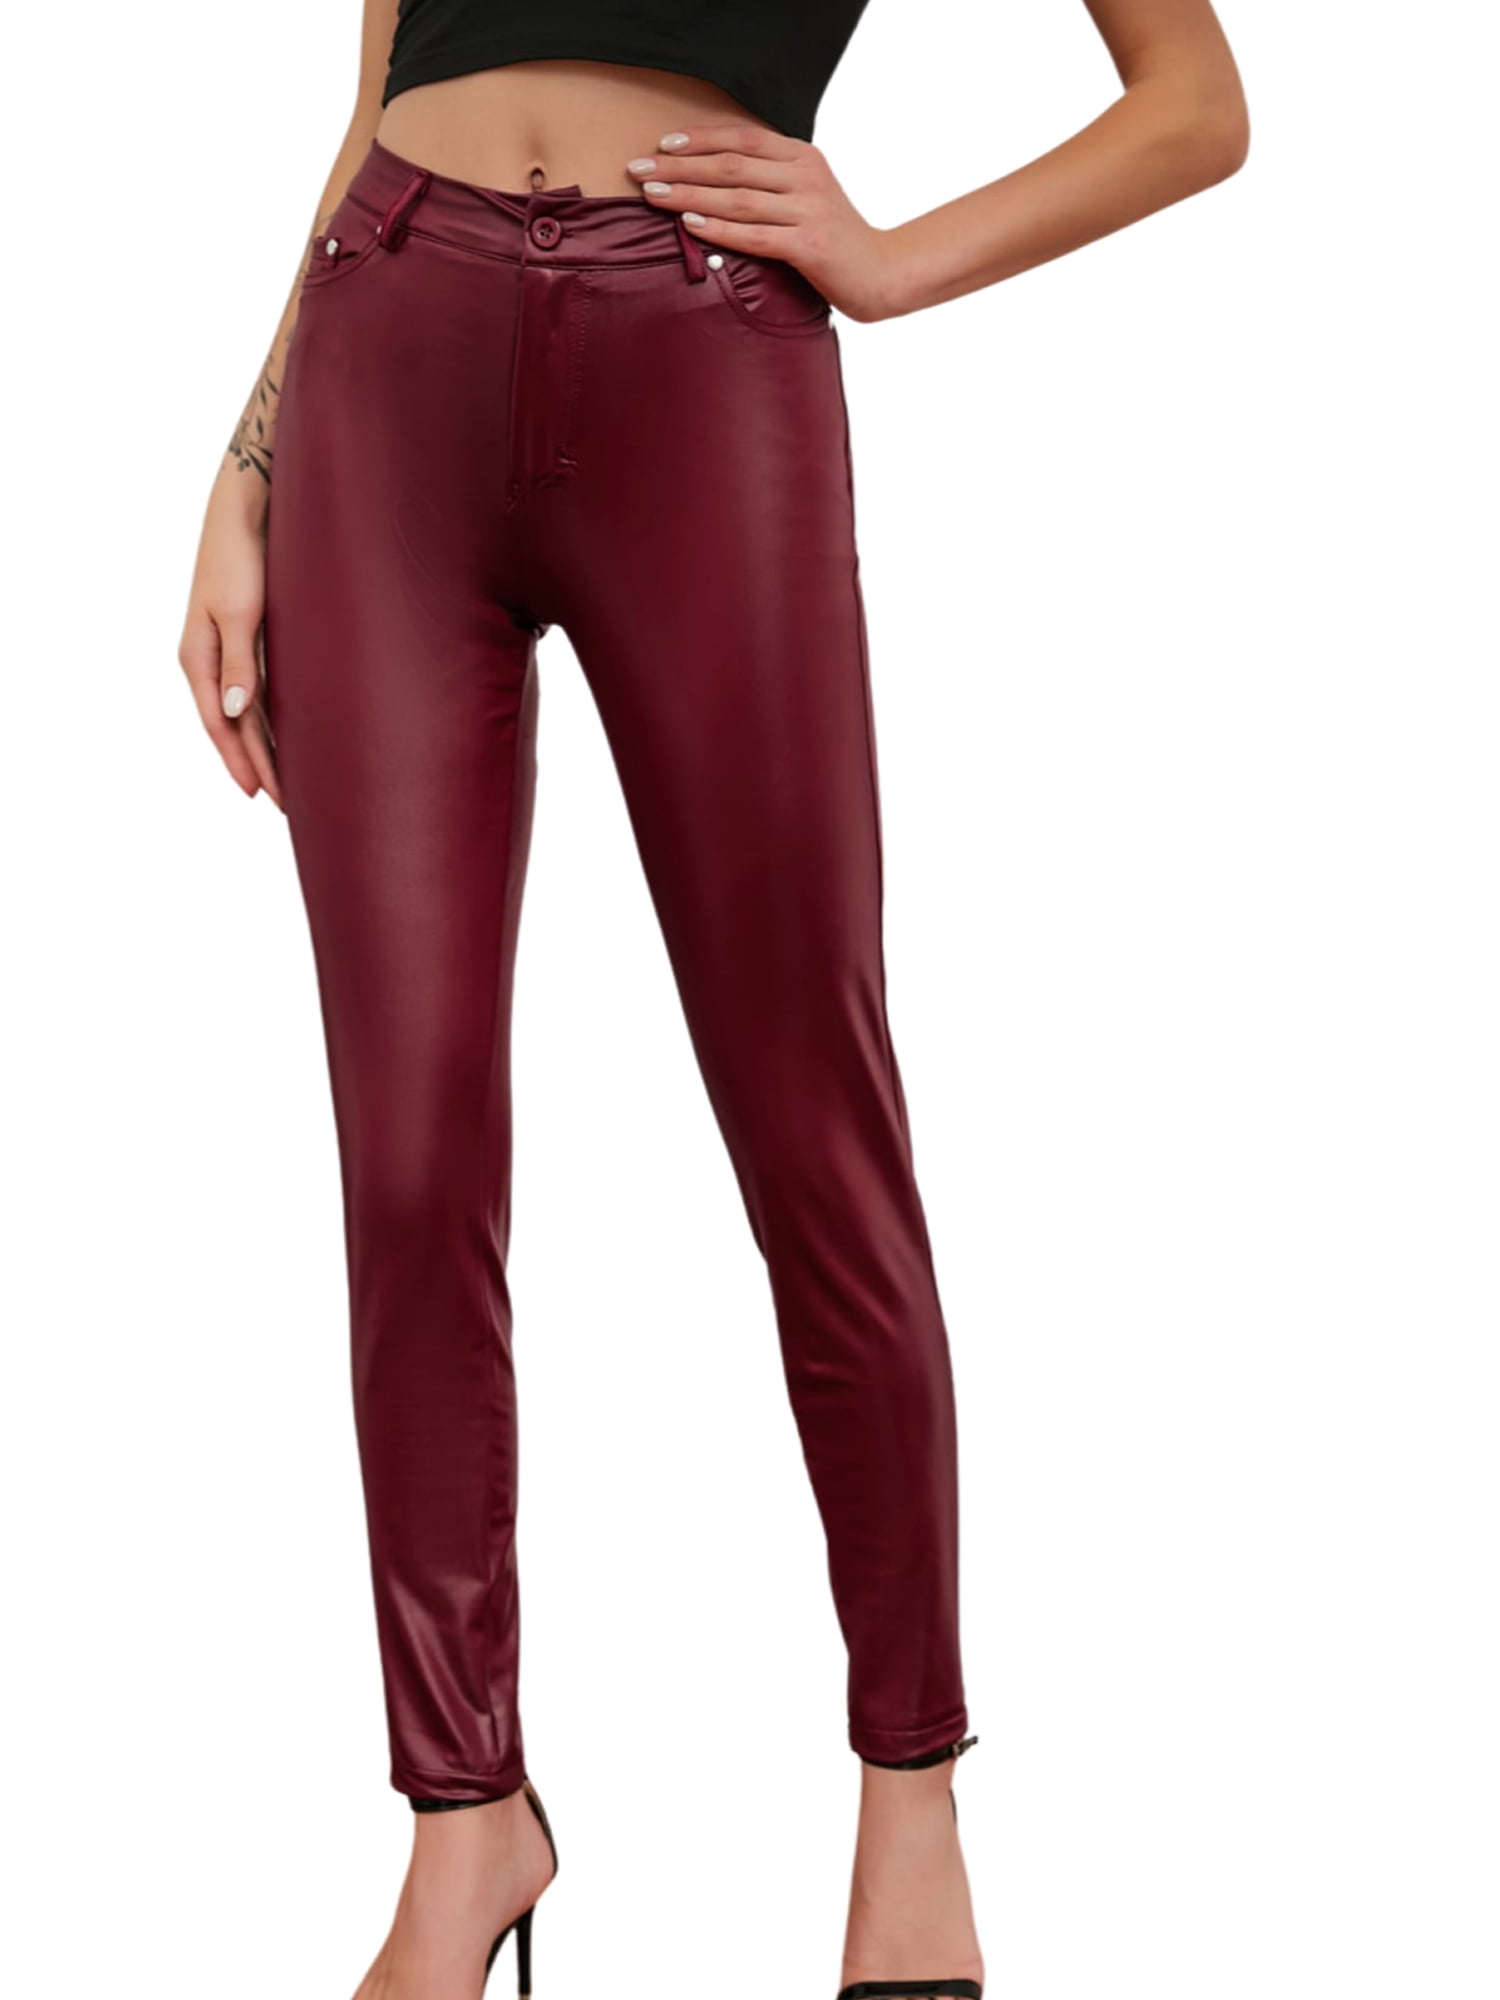 Plus Size Wet Look Faux Leather Leggings Shaping Butt Push Up